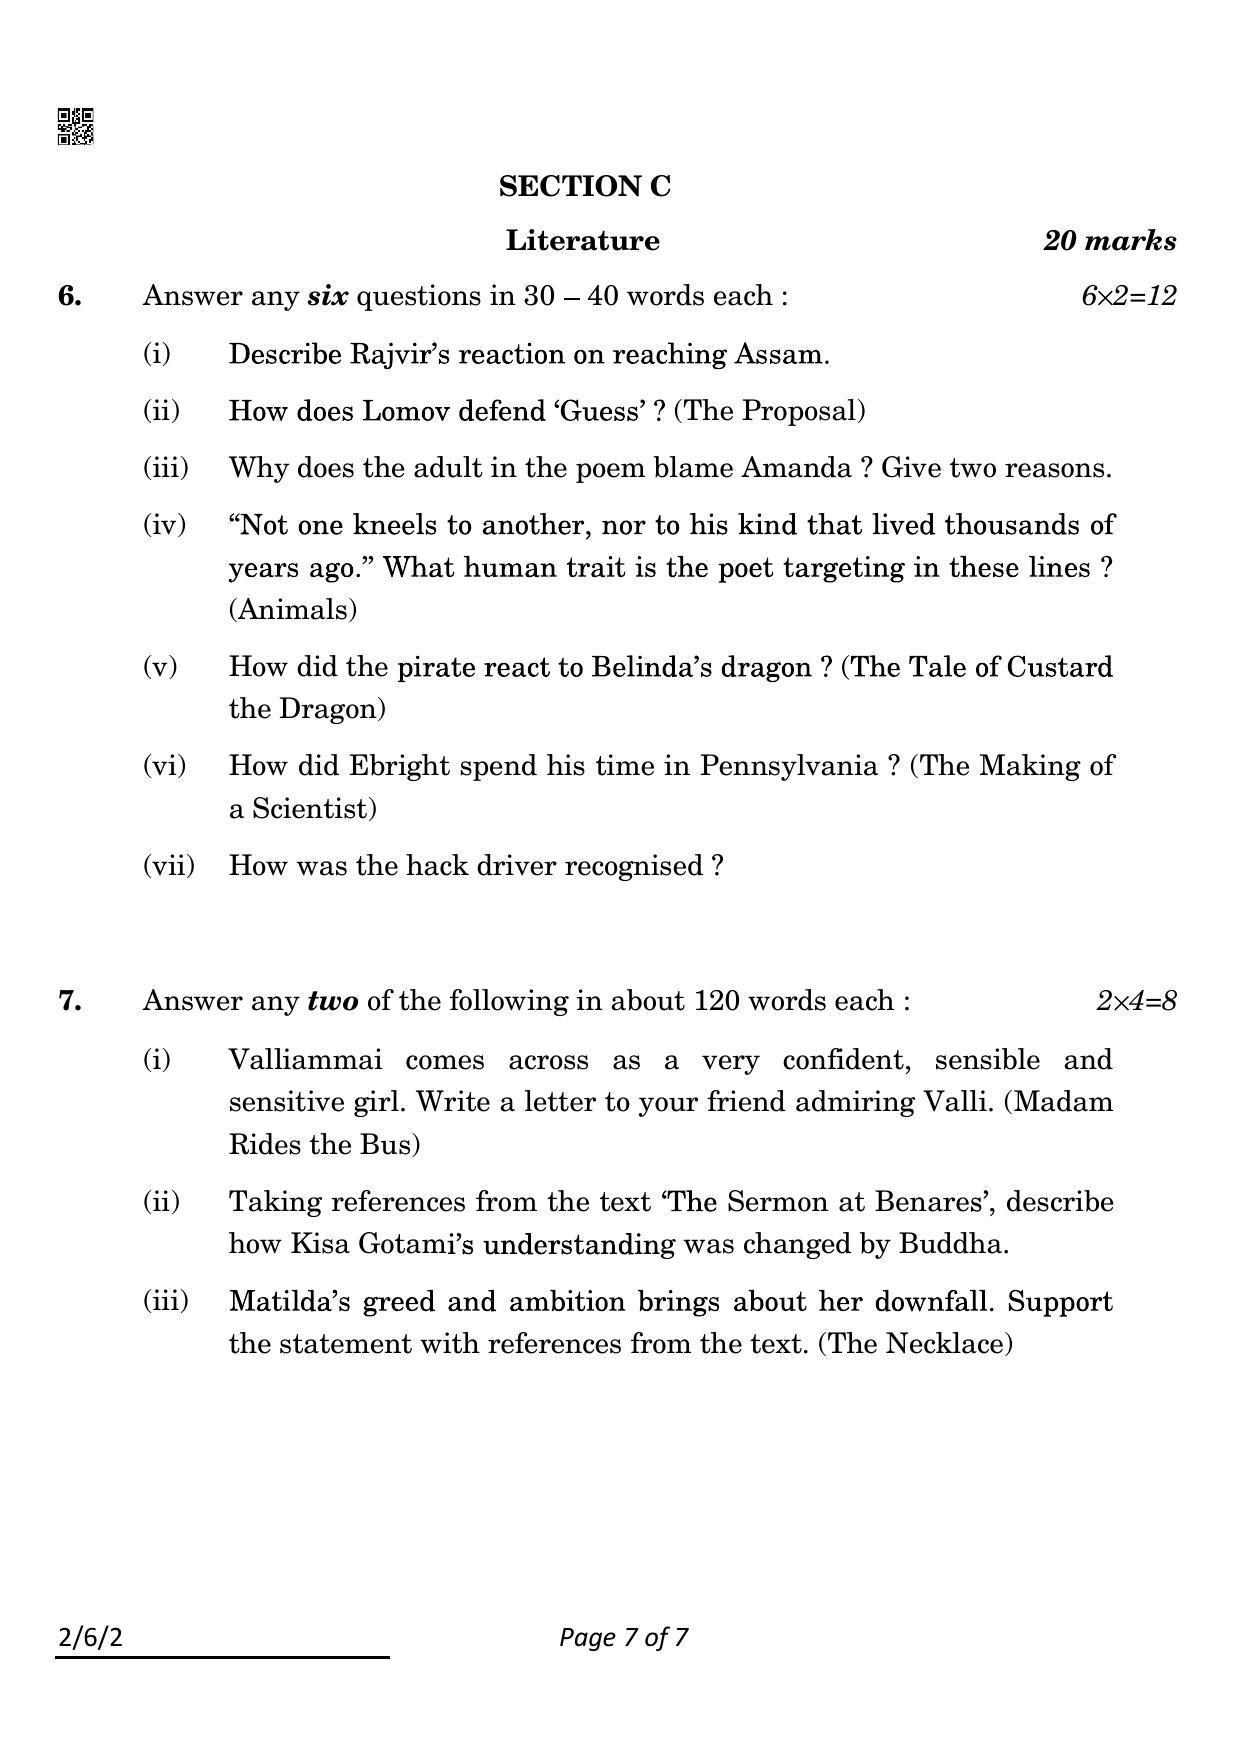 CBSE Class 10 2-6-2_English Language And Literature 2022 Compartment Question Paper - Page 7